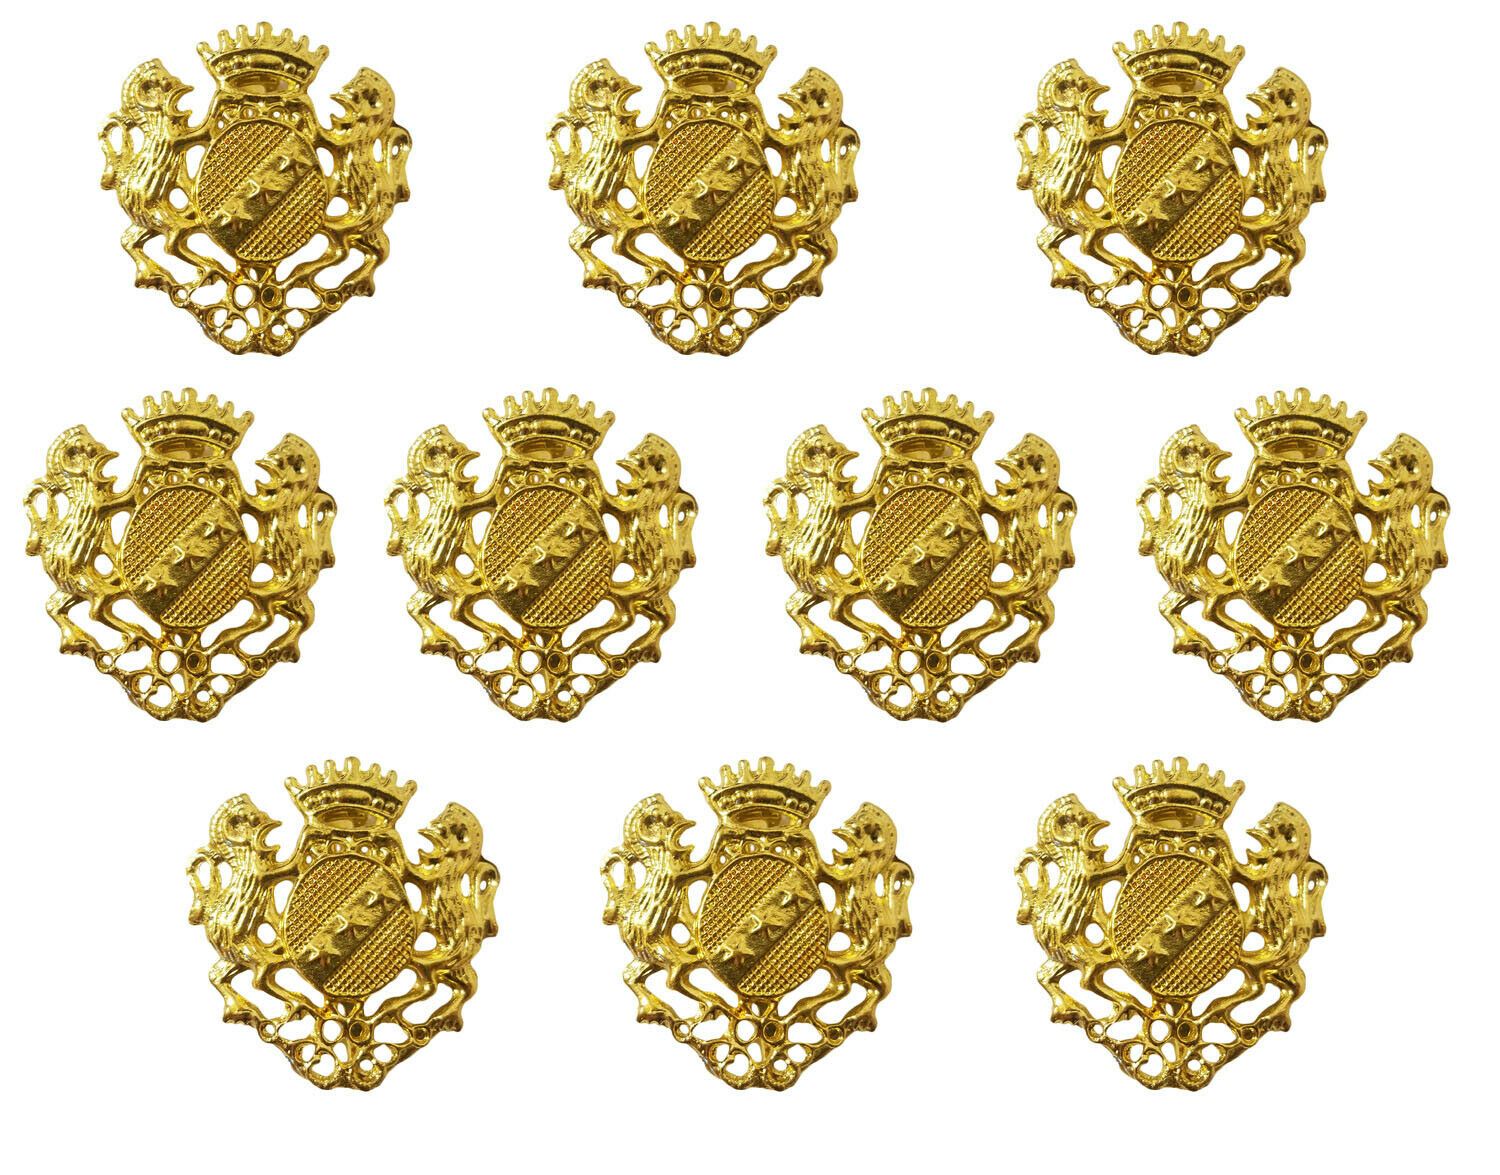 10 Pcs Gold Brass Plated Animal Coat of Arms Pin Brooch Craft Jewelry Findings